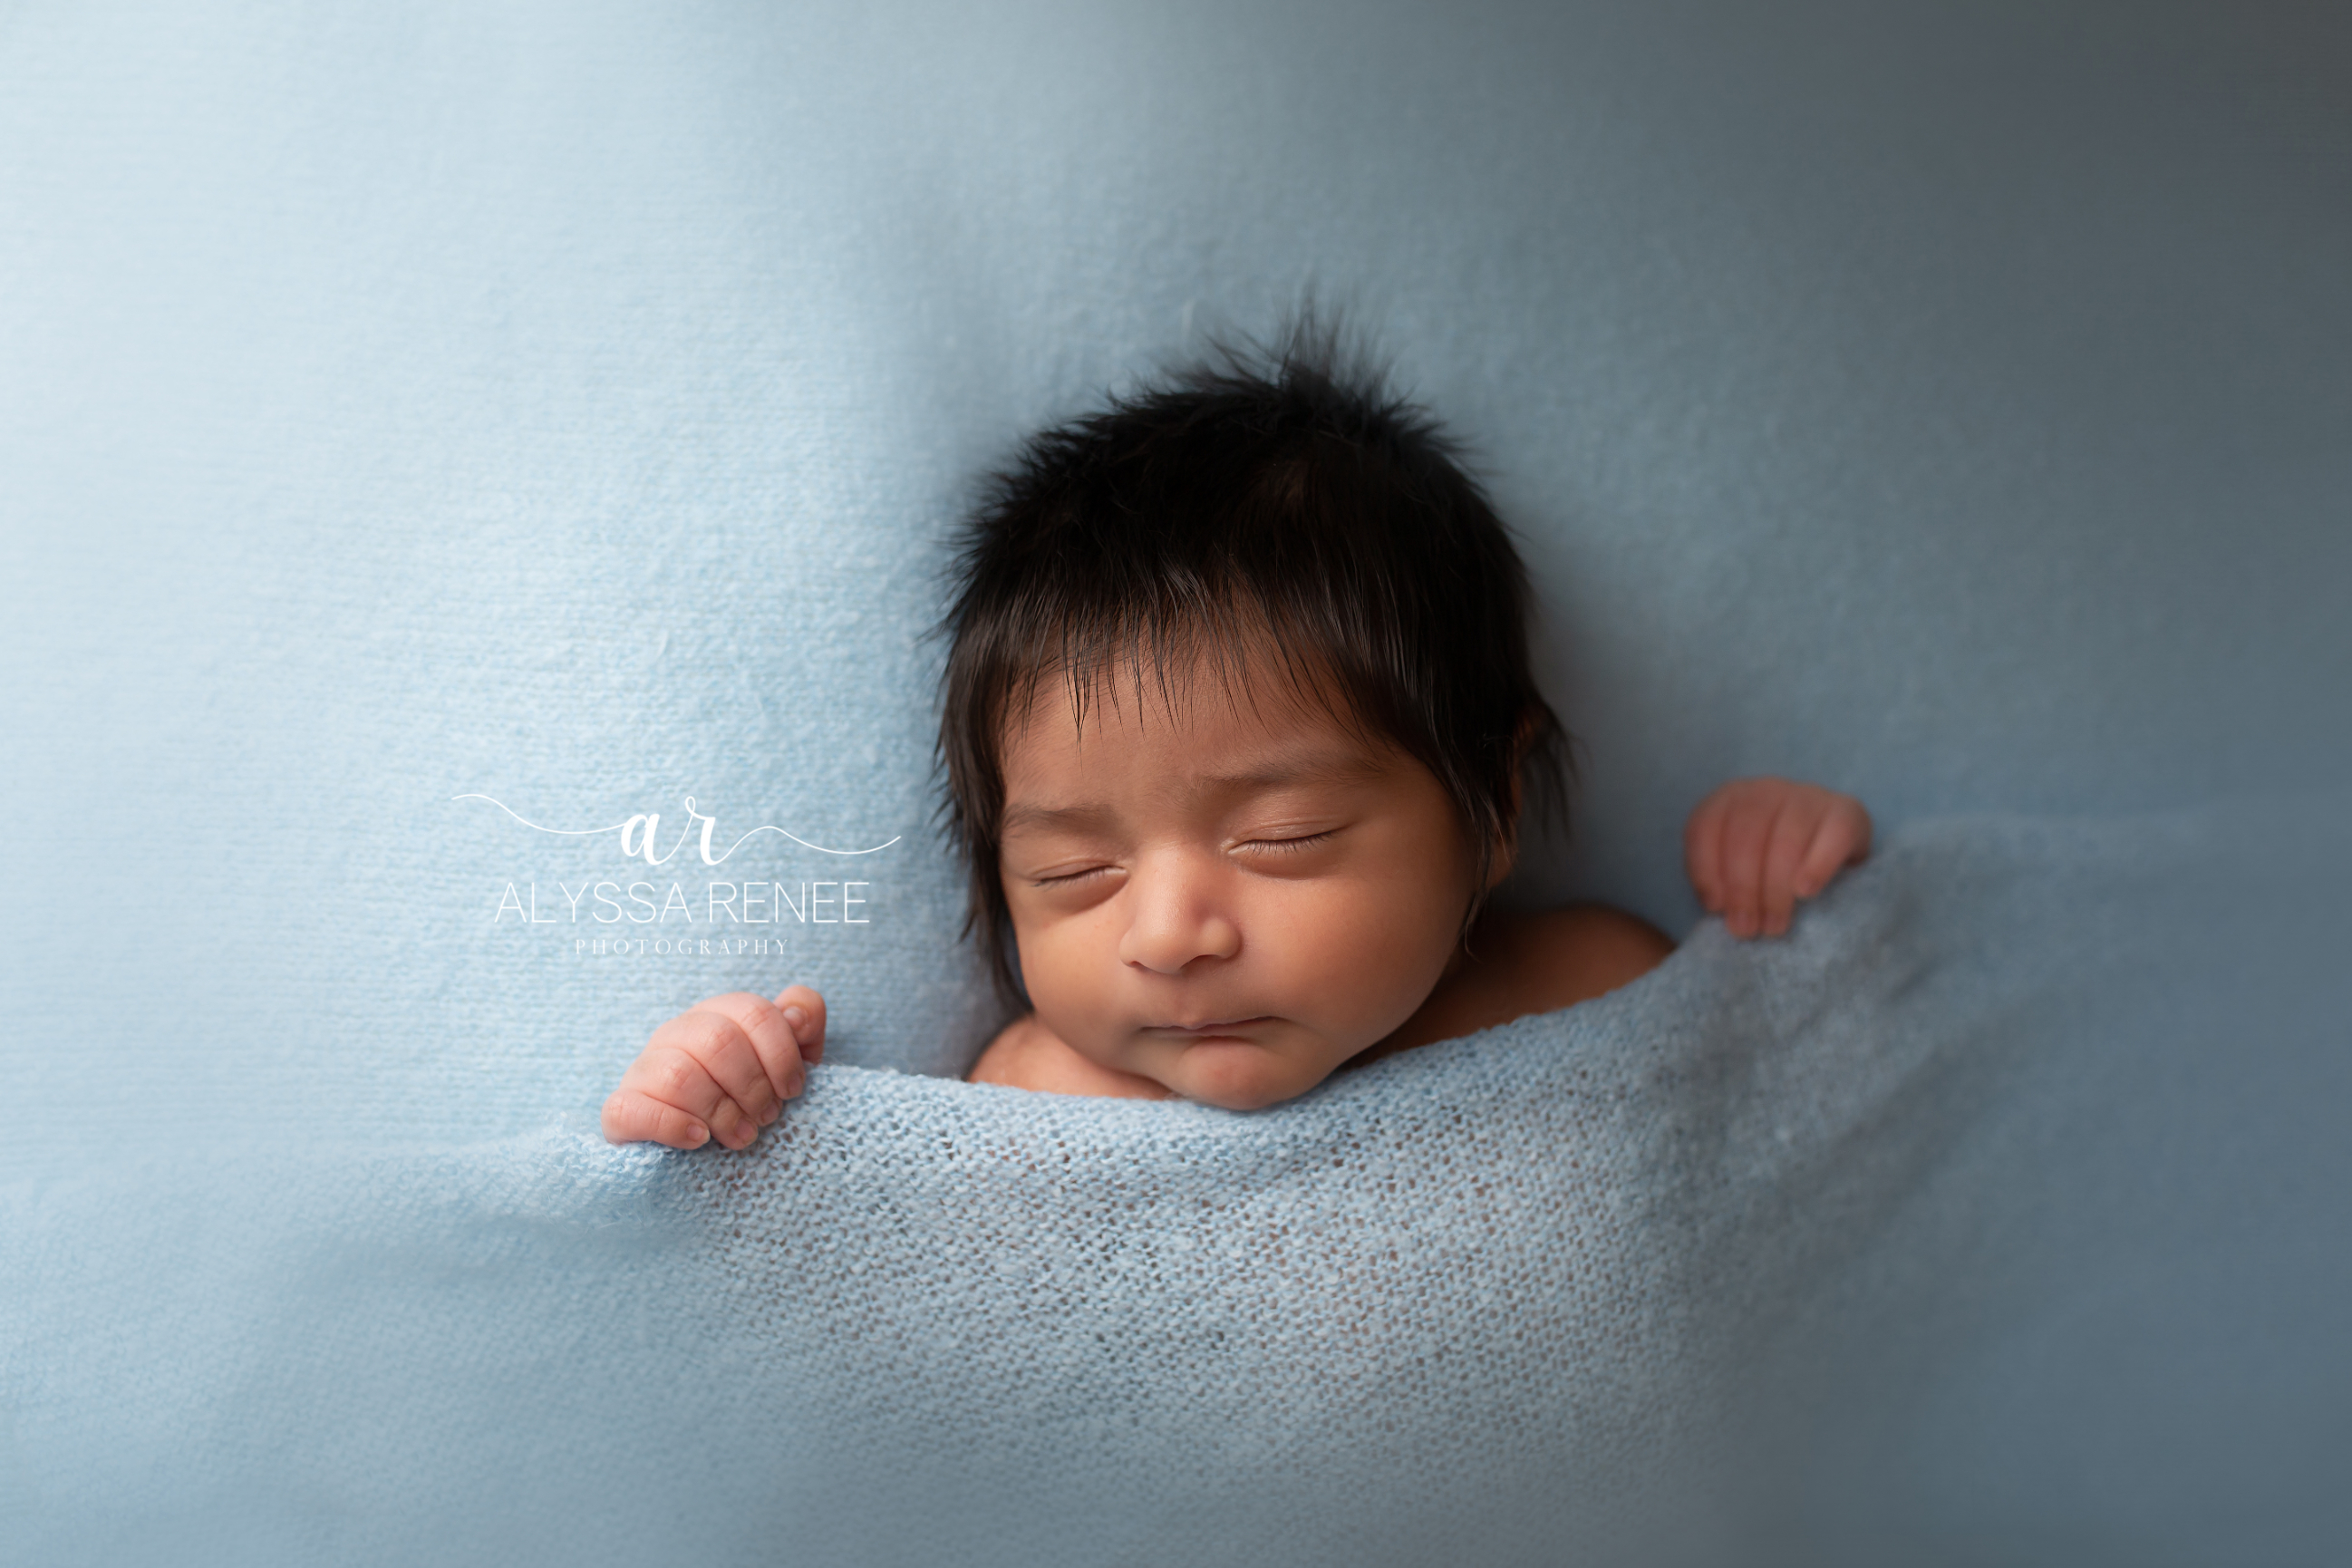 Baby pulling up covers in this artistic newborn portrait in our St Johns county studio